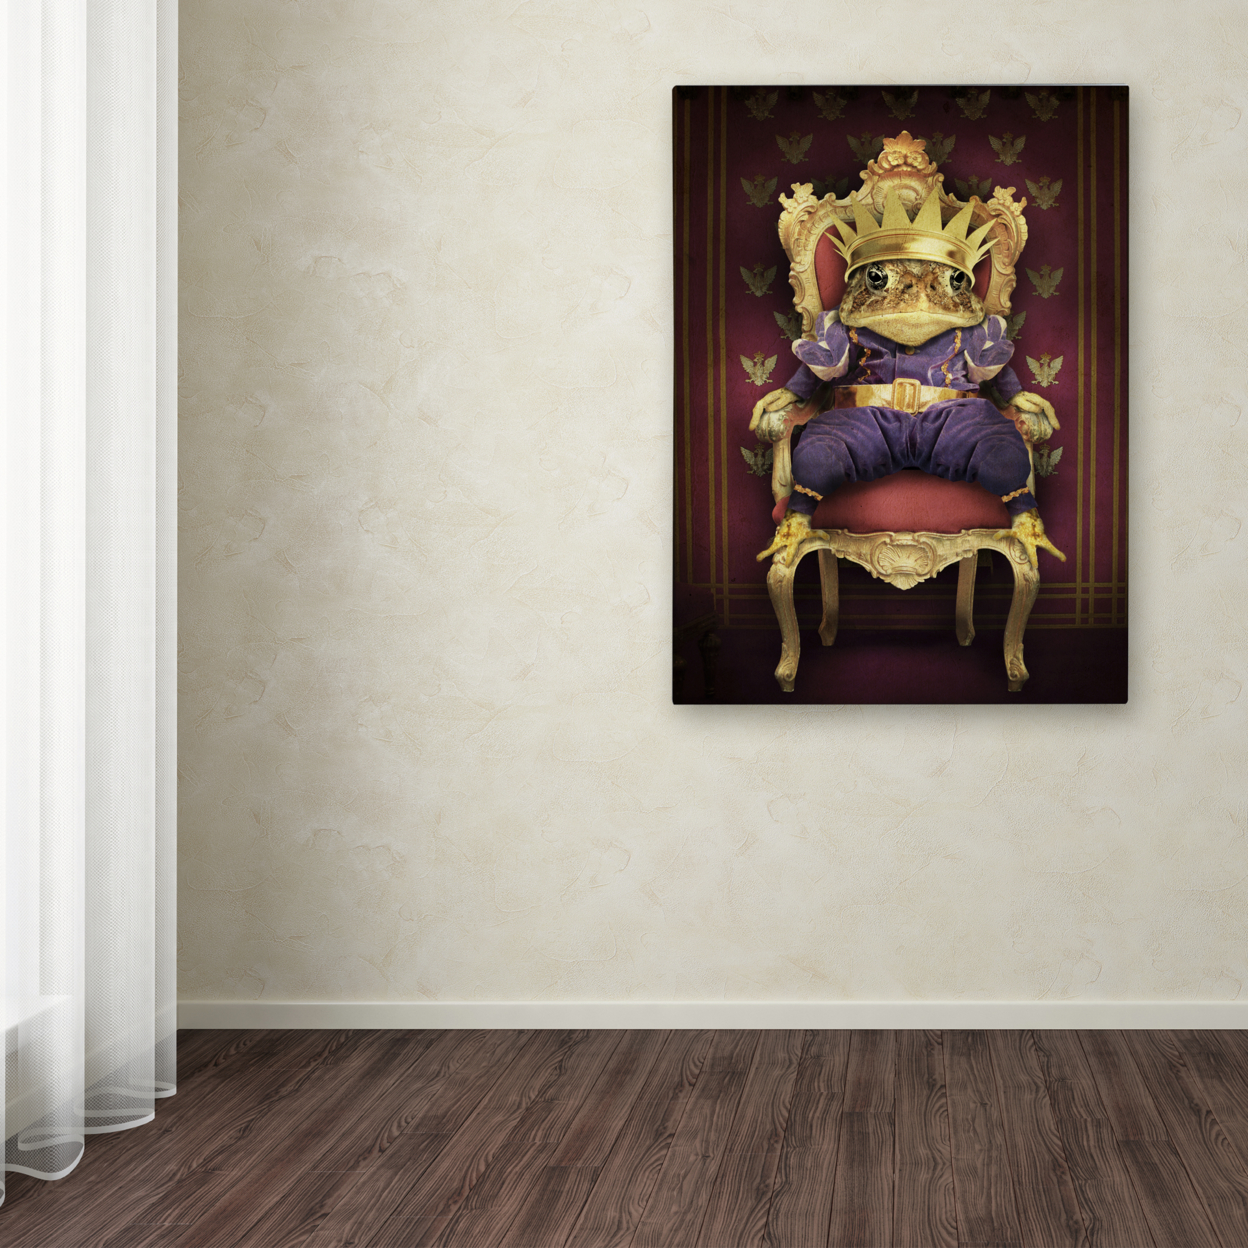 J Hovenstine Studios 'The Frog Prince' Canvas Wall Art 35 X 47 Inches